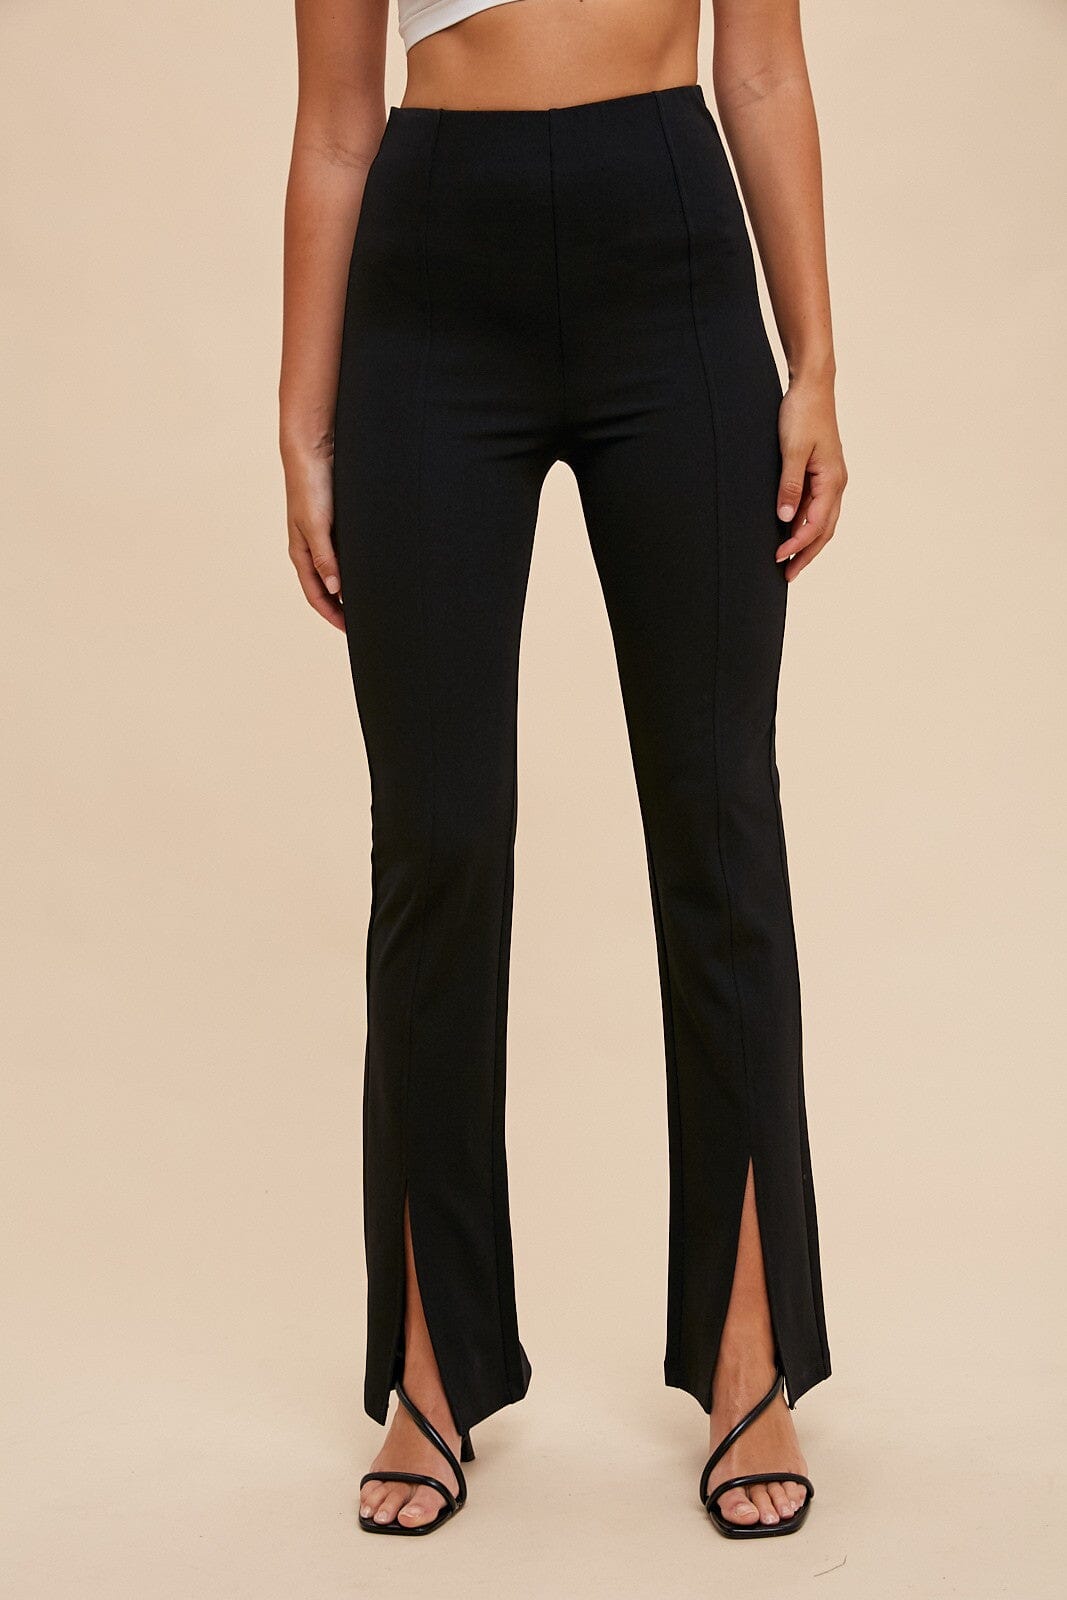 SLIT HEM AND PINTUCK FRONT FLARE STRETCH PANTS annie wear 